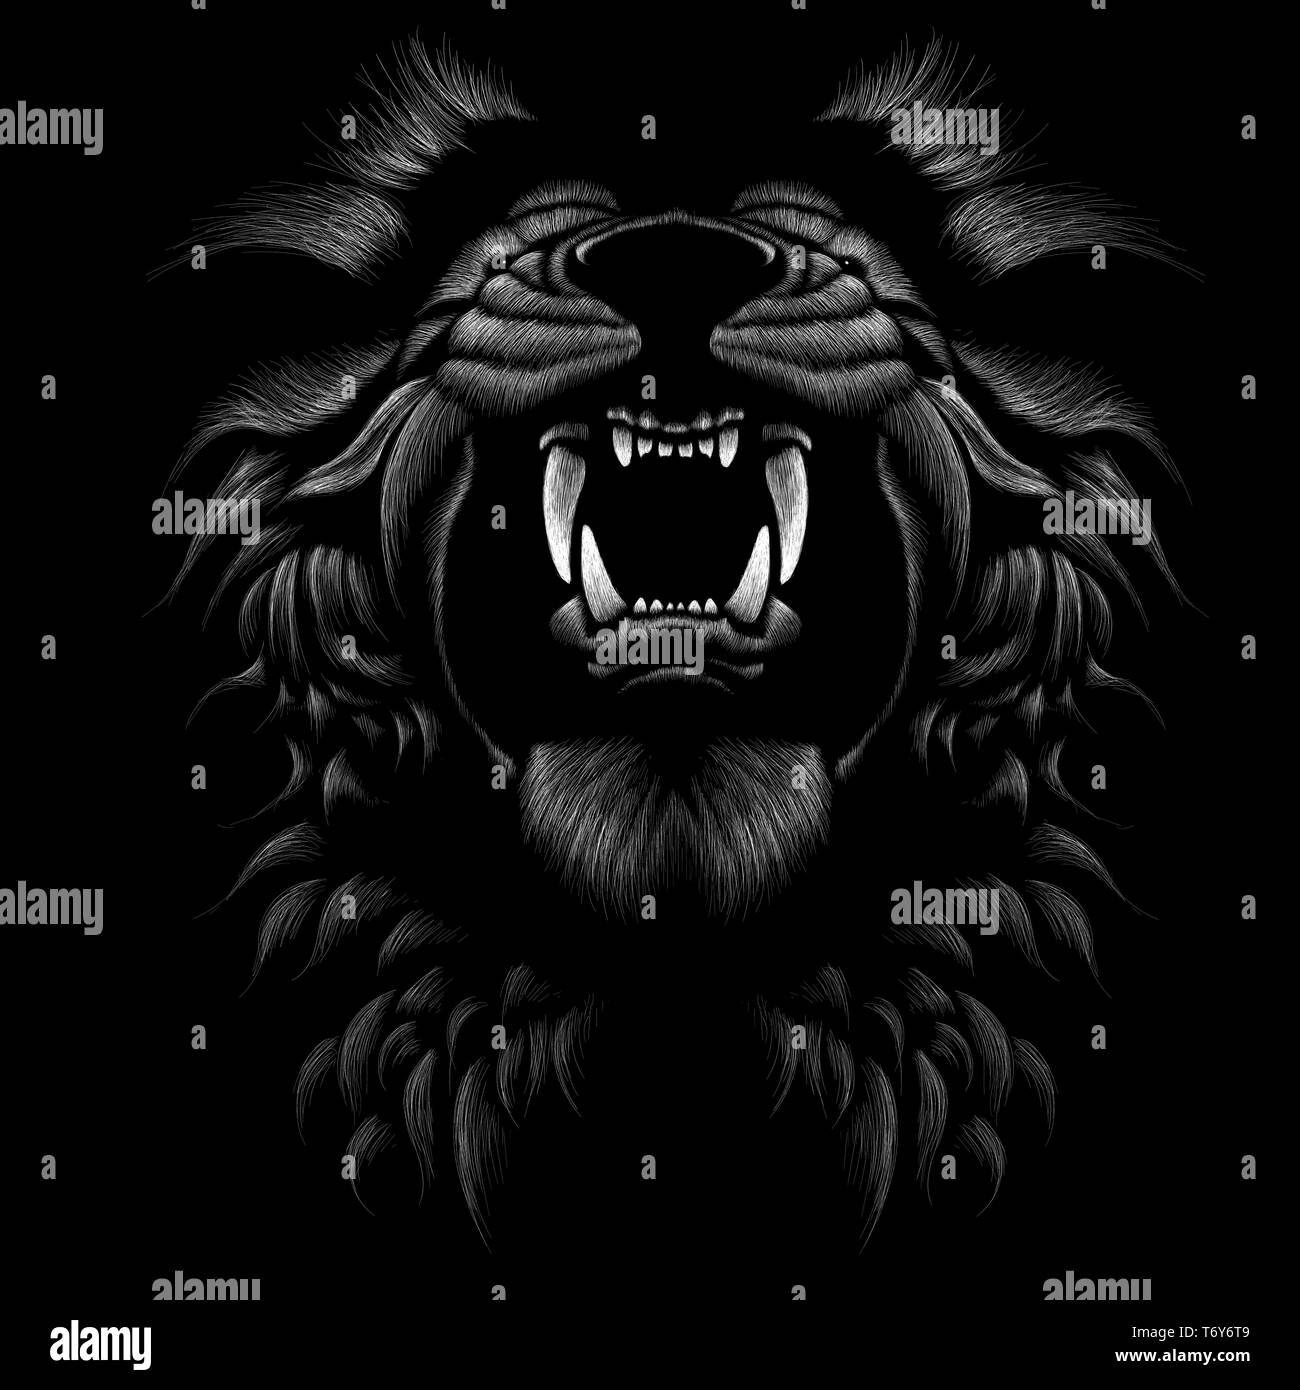 Lion Face Wallpaper: Over 6,679 Royalty-Free Licensable Stock Illustrations  & Drawings | Shutterstock